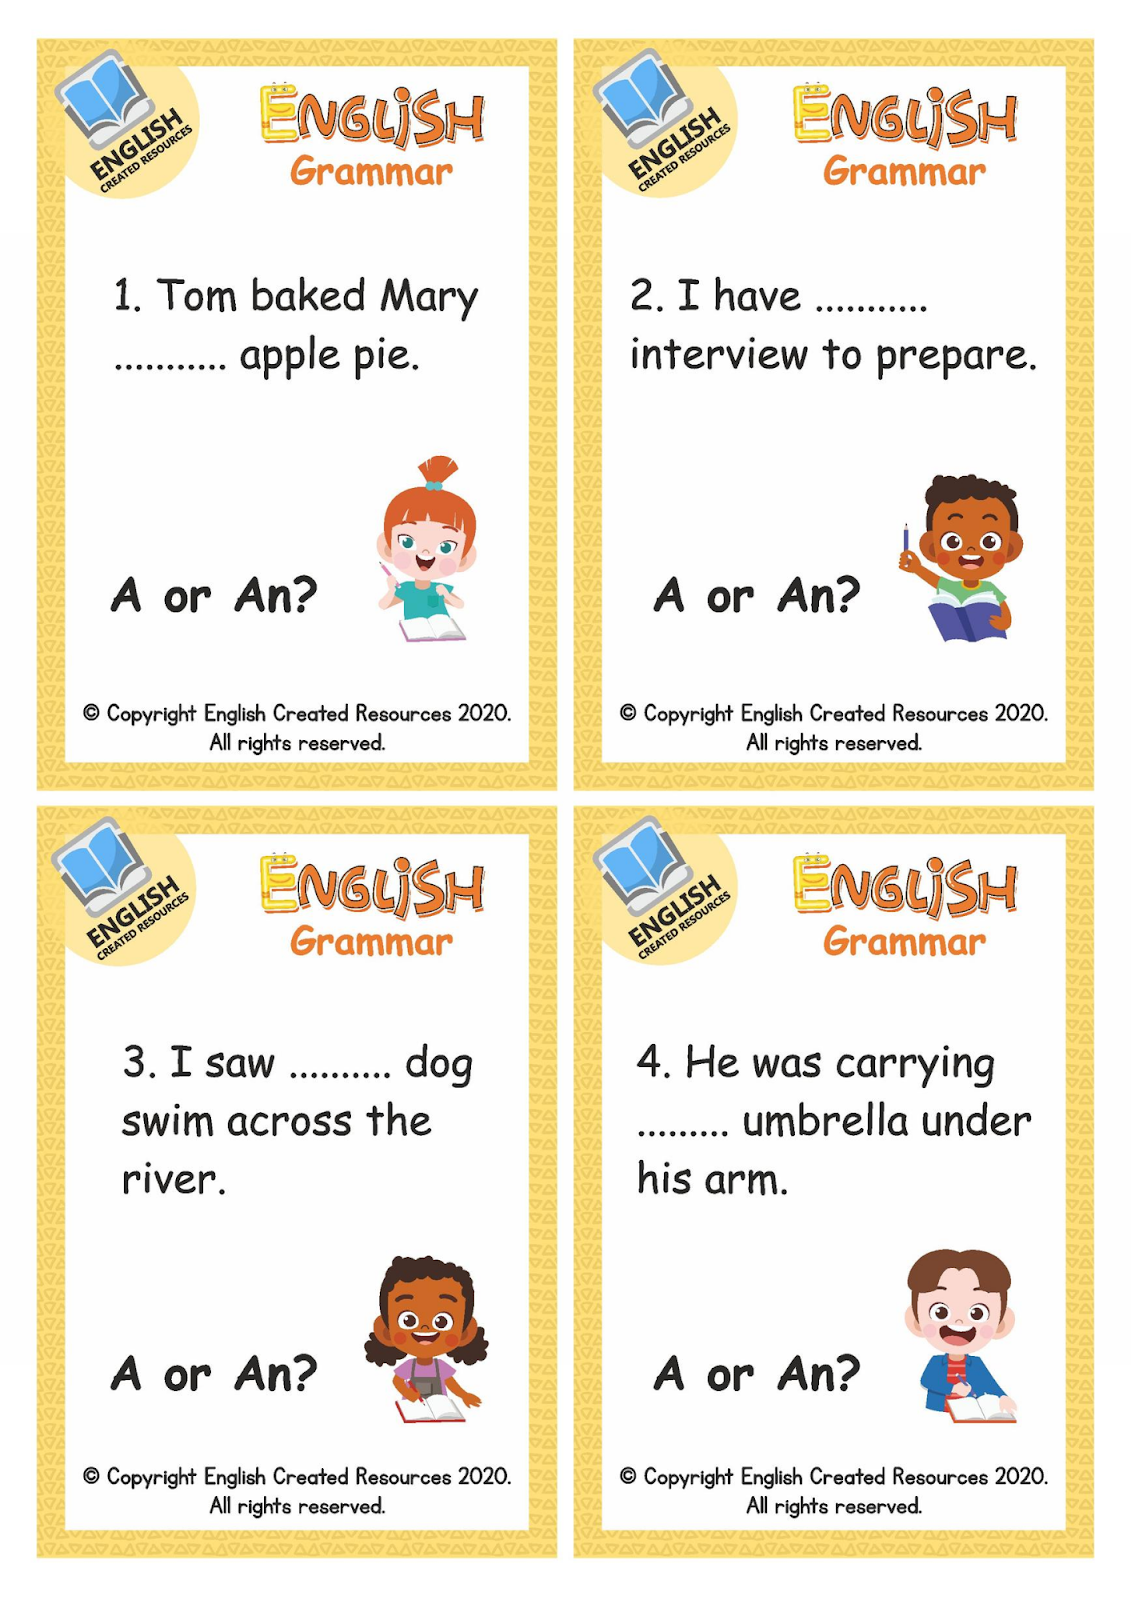 english-grammar-a-or-an-worksheets-english-created-resources